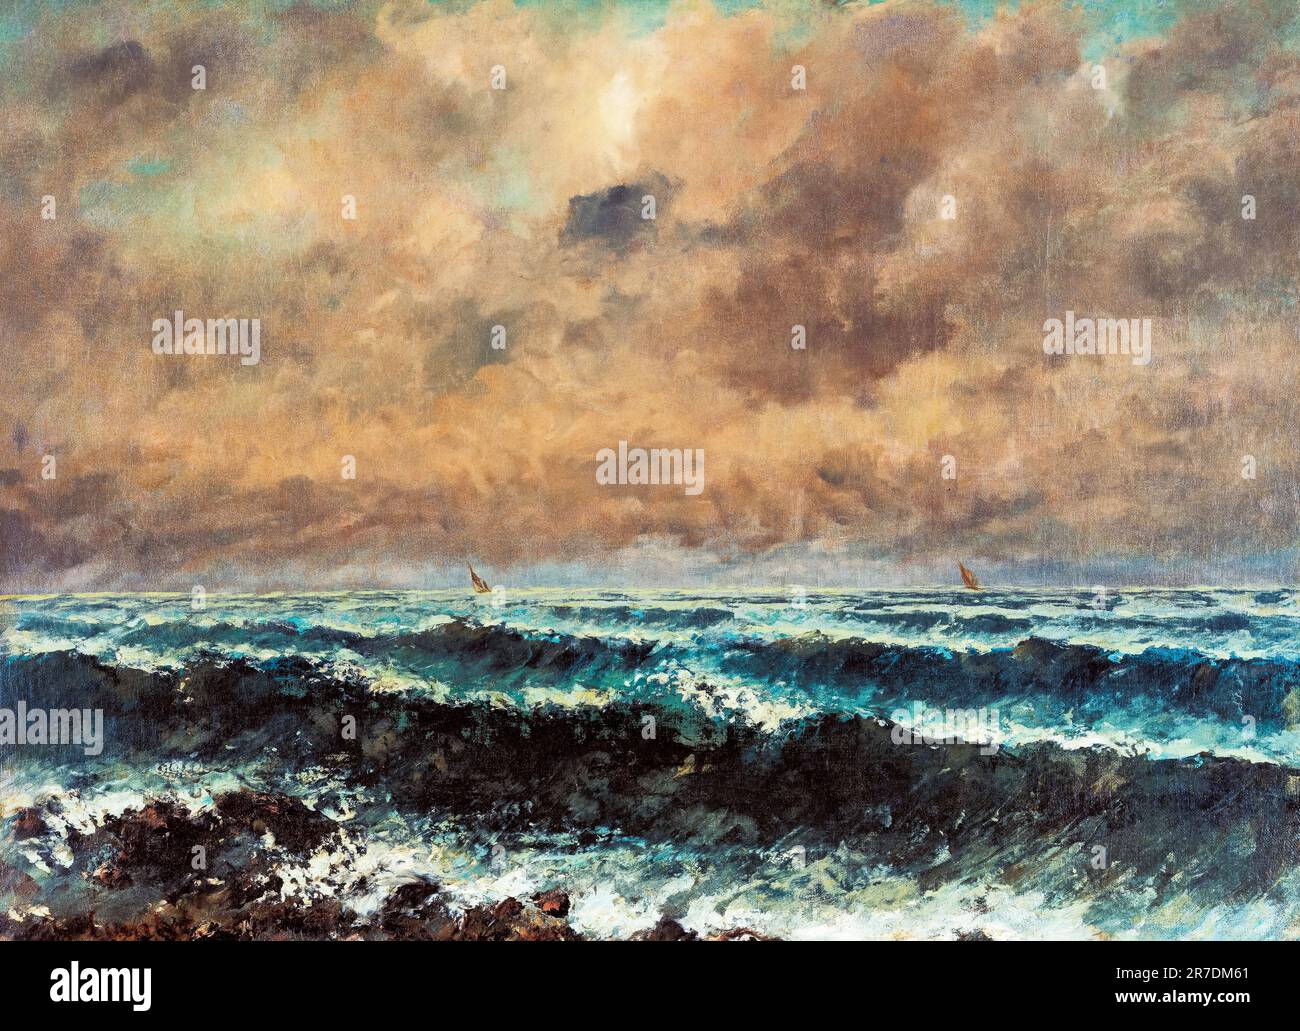 Gustave Courbet, Autumn Sea, landscape painting in oil on canvas, 1867 Stock Photo